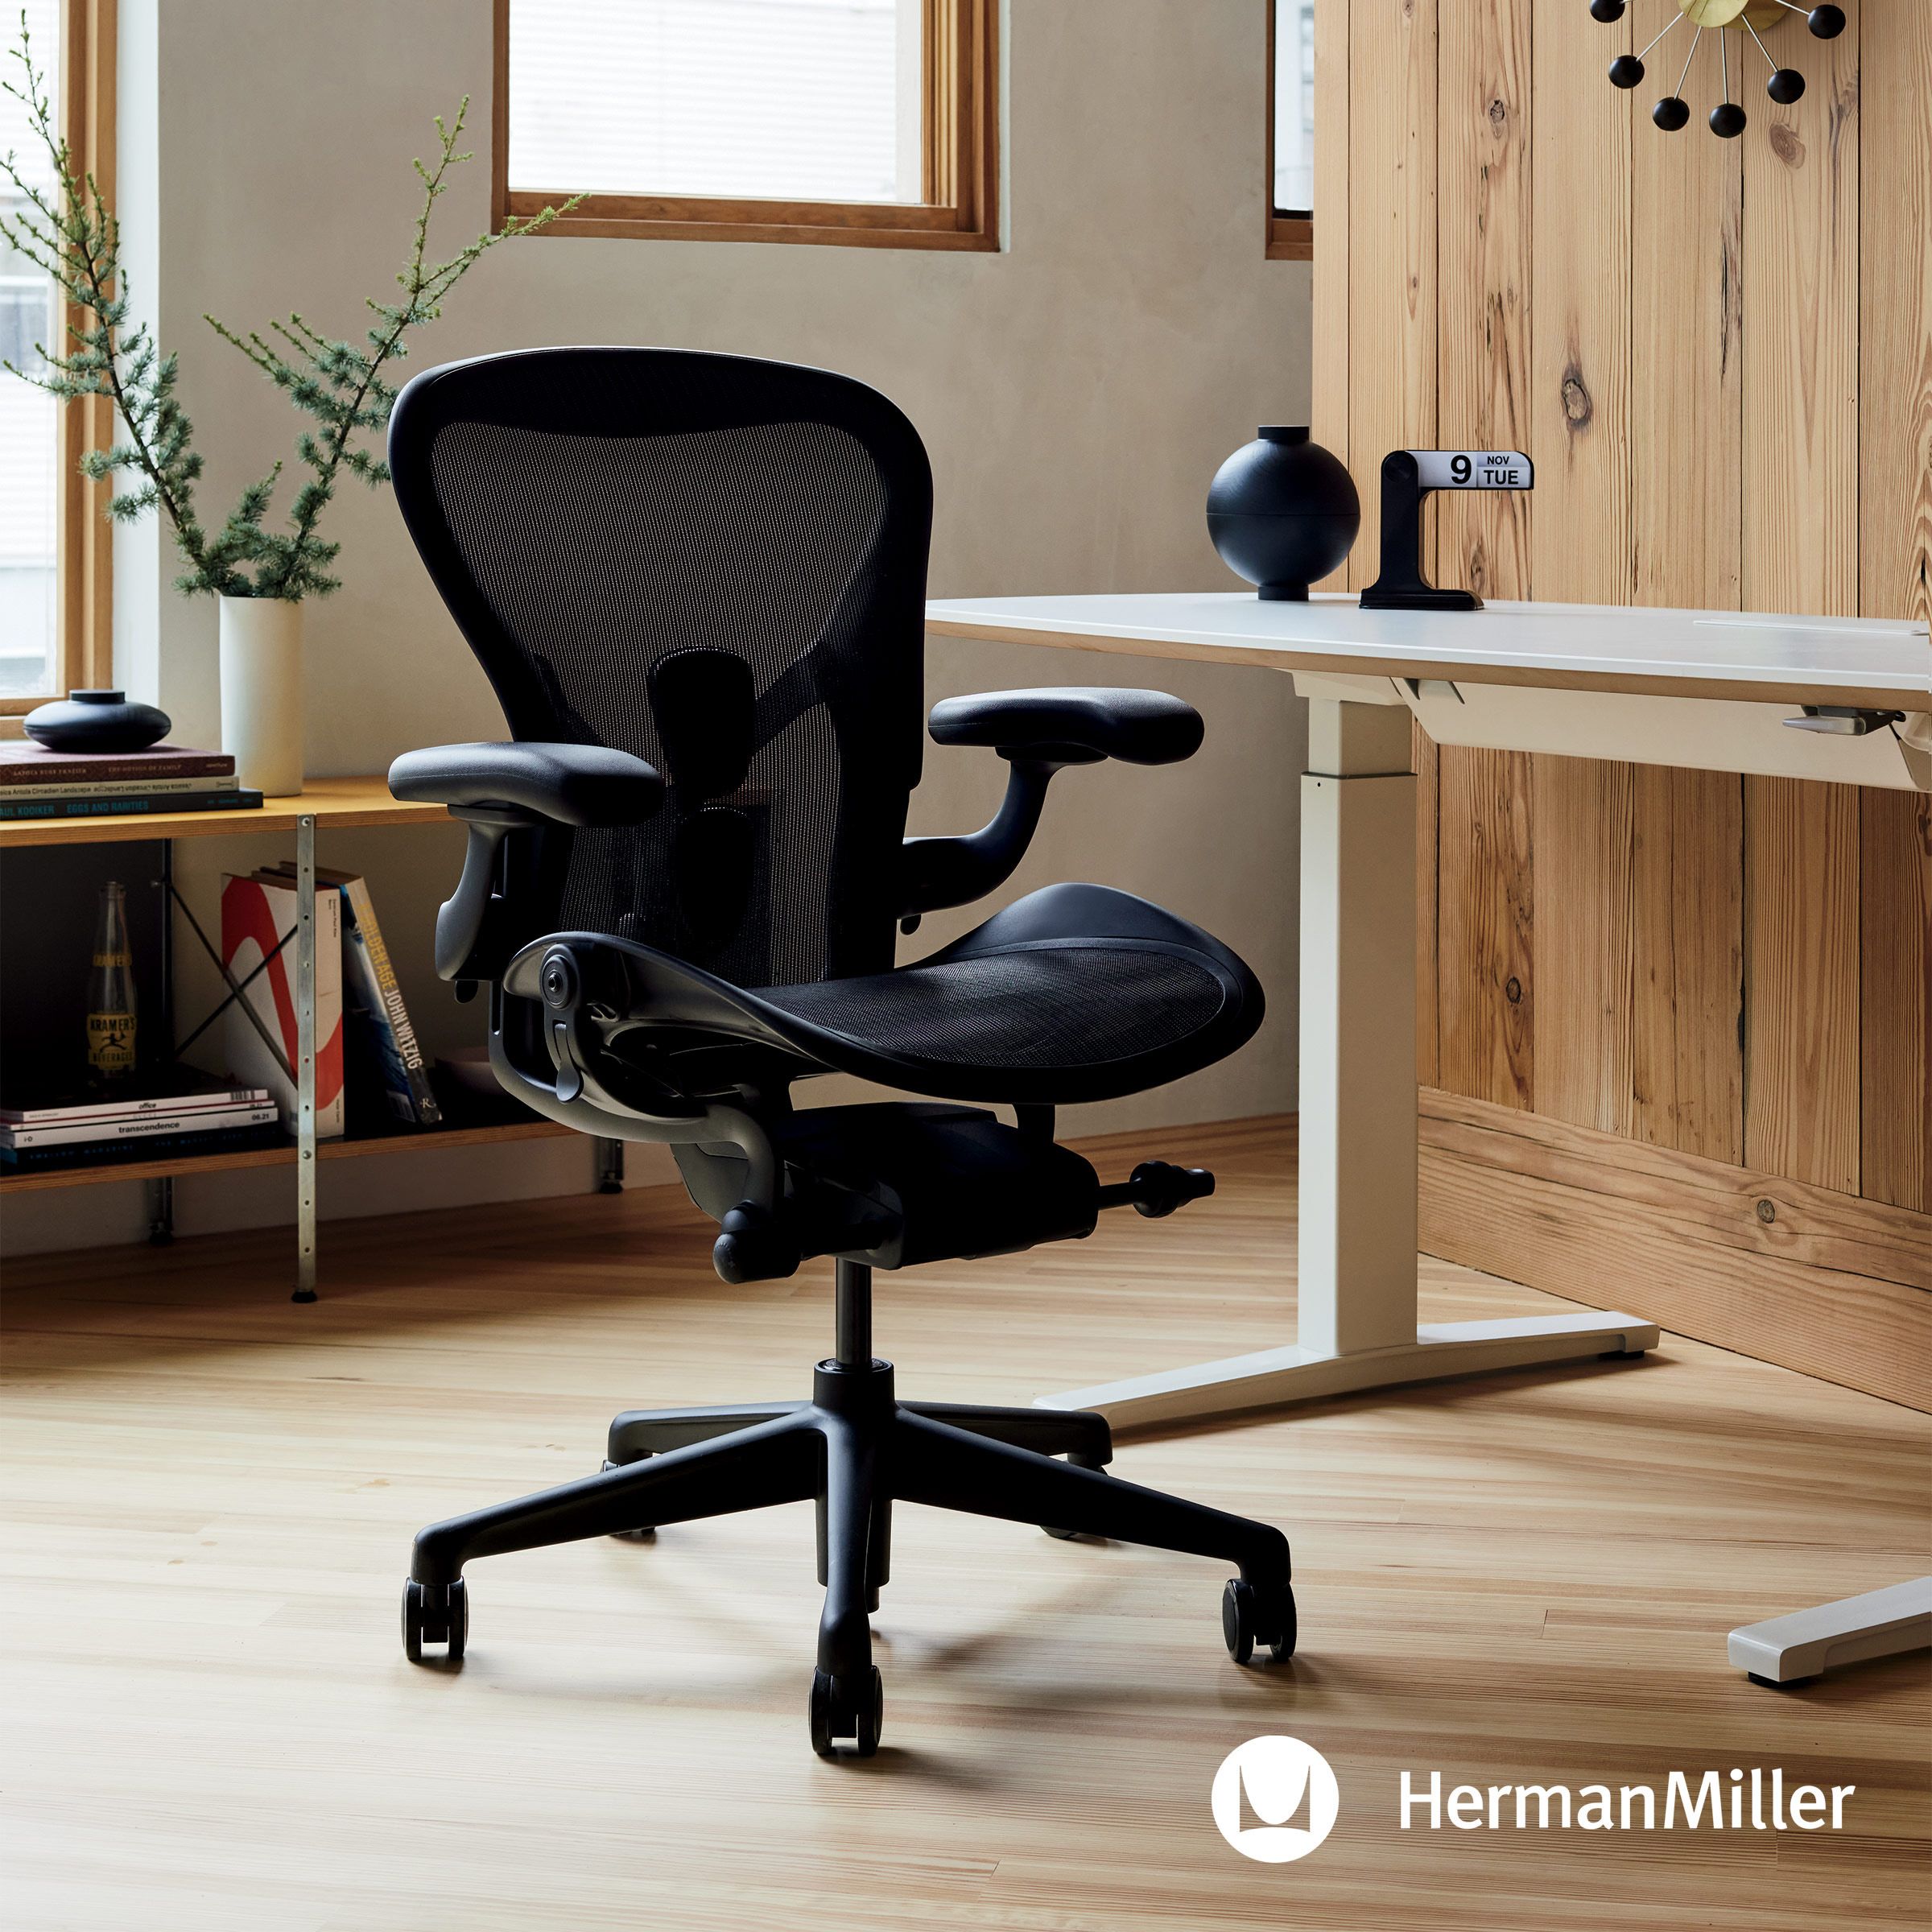 Herman Miller Chair in a home office